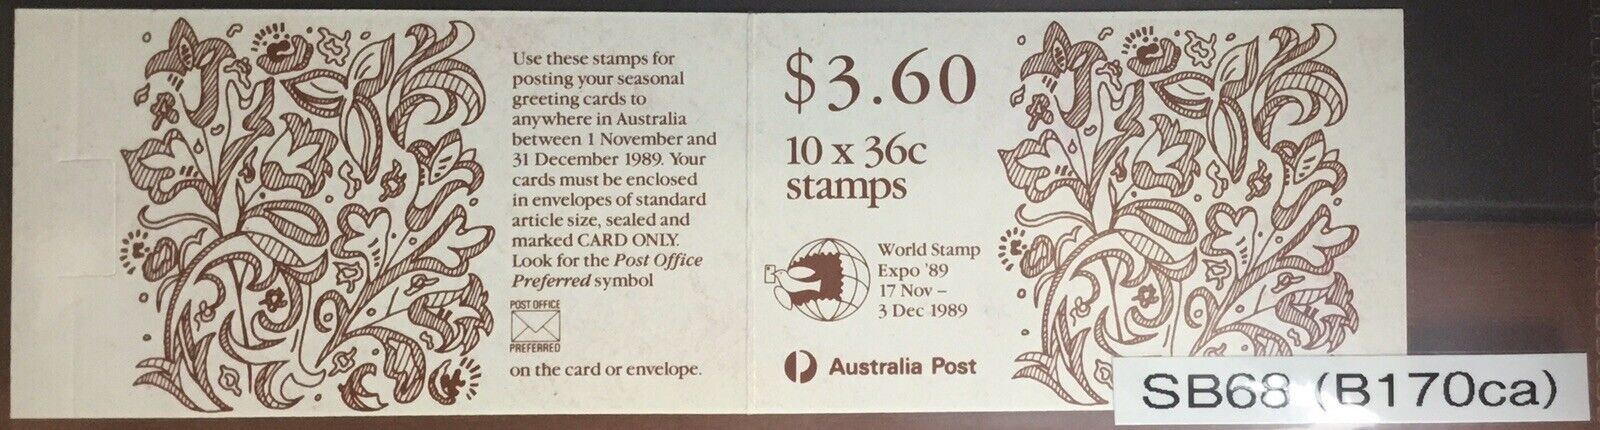 Australia 1989 Christmas Cash special price In stock World Stamp SB68 Opt Expo Booklet Unuse